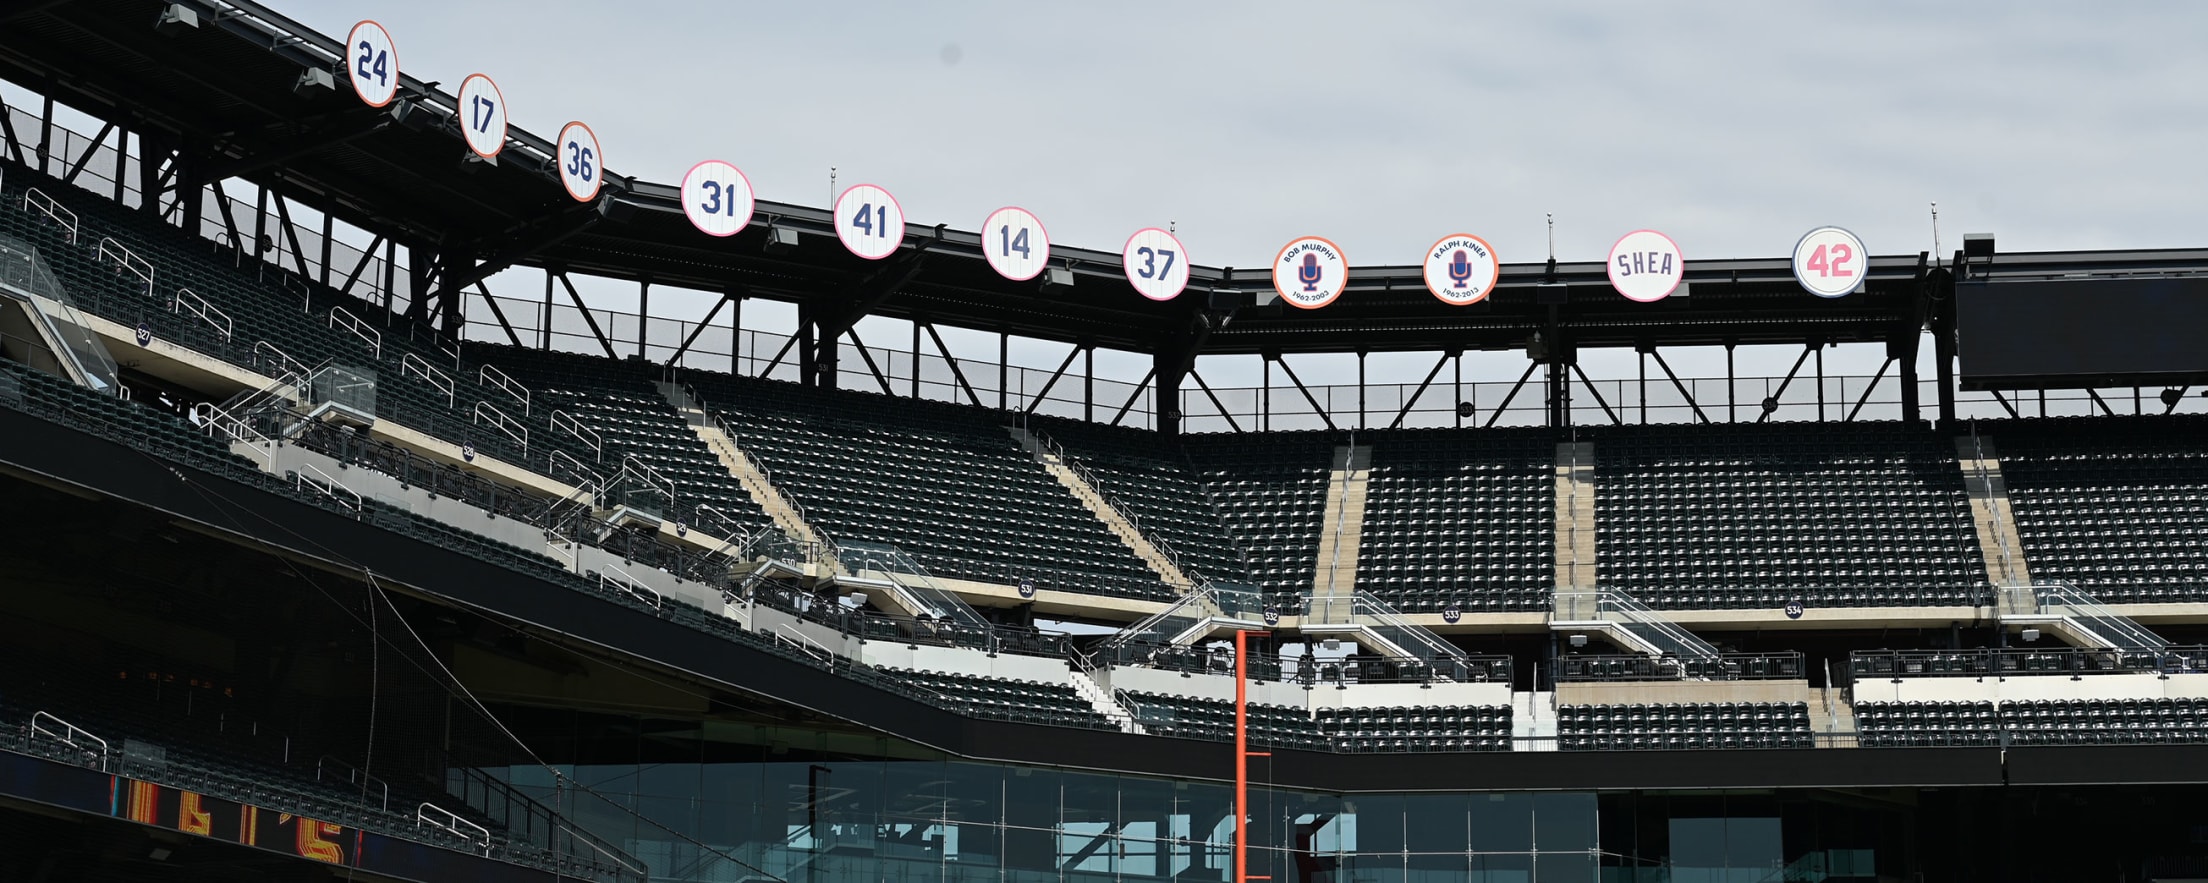 Retired Numbers, New York Mets Wiki